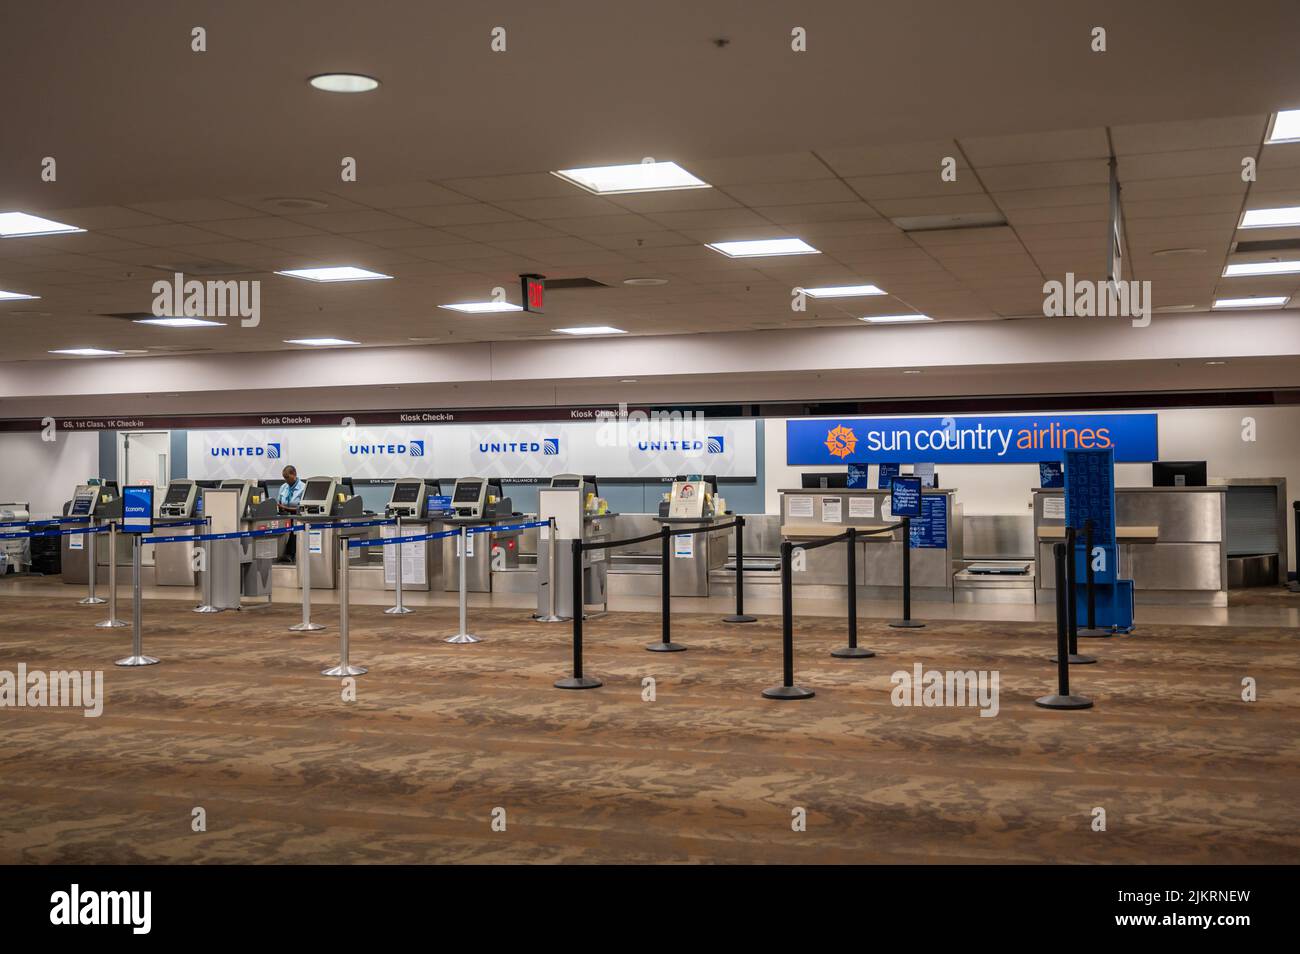 Waiting area at the United Airlines and Sun Country Airlines terminal.  Stock Photo